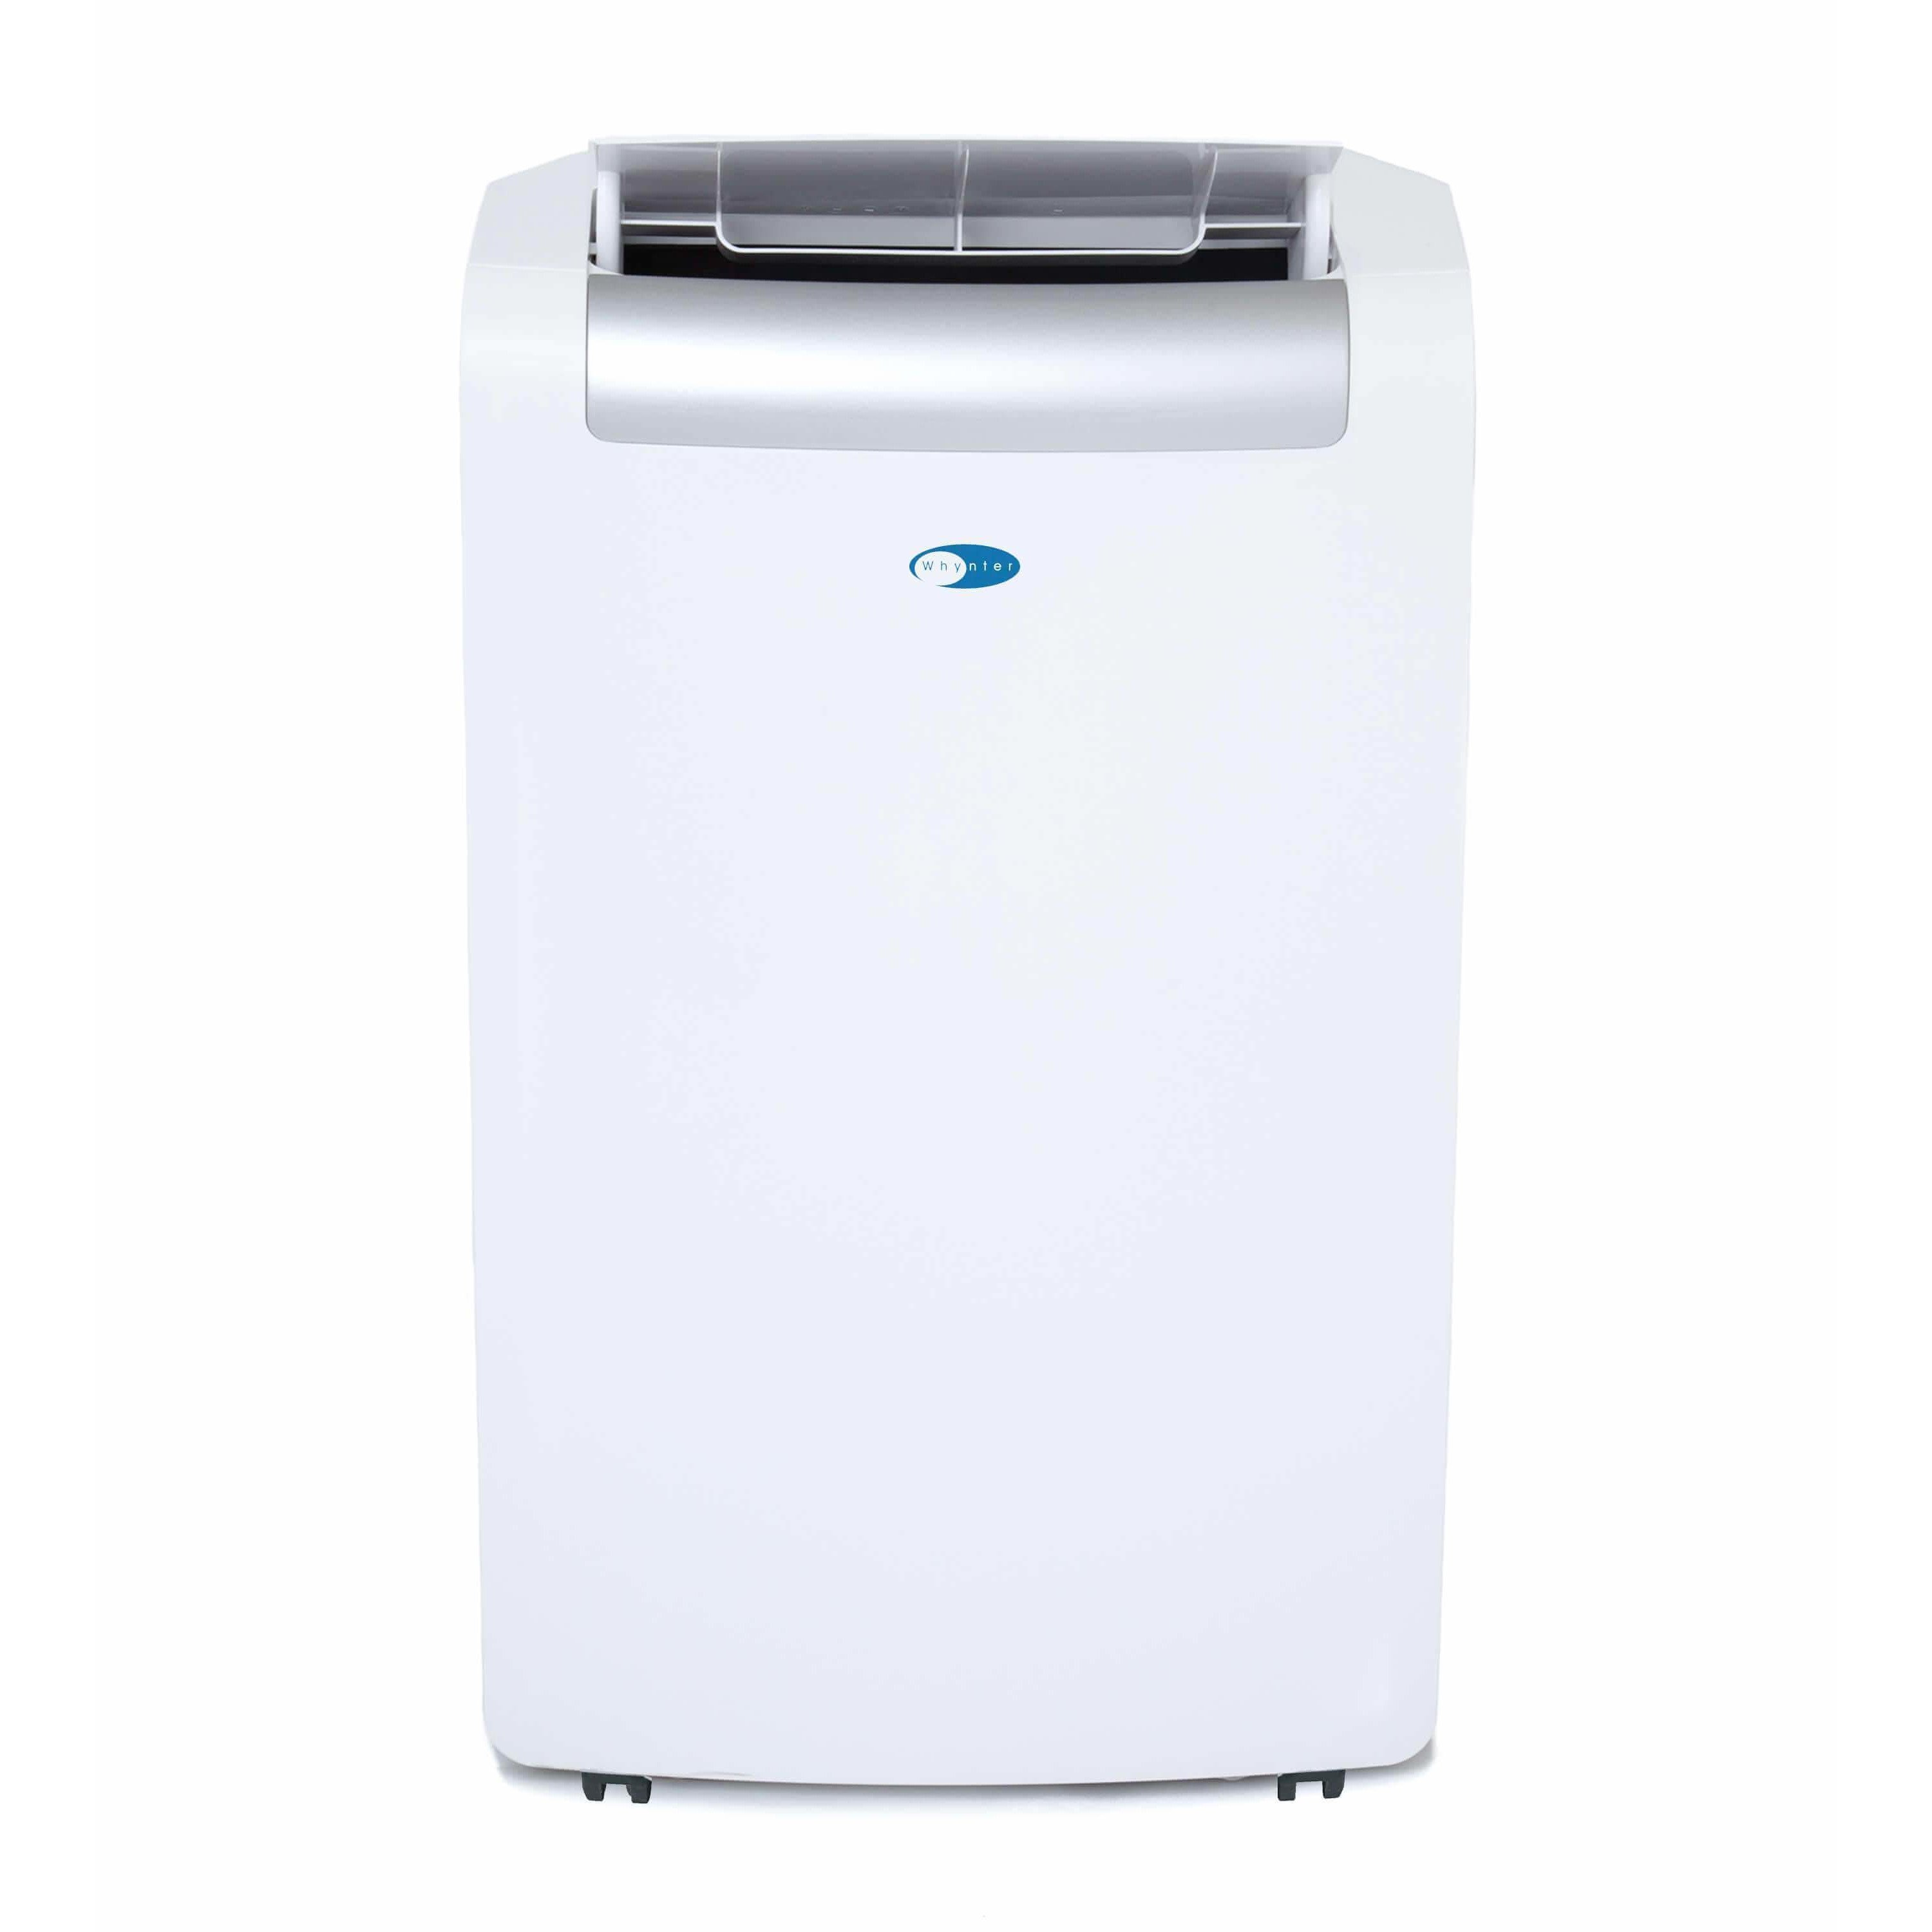 Whynter ARC-148MHP 14,000 BTU Portable Air Conditioner and Heater with 3M Silvershield Filter Plus Autopump